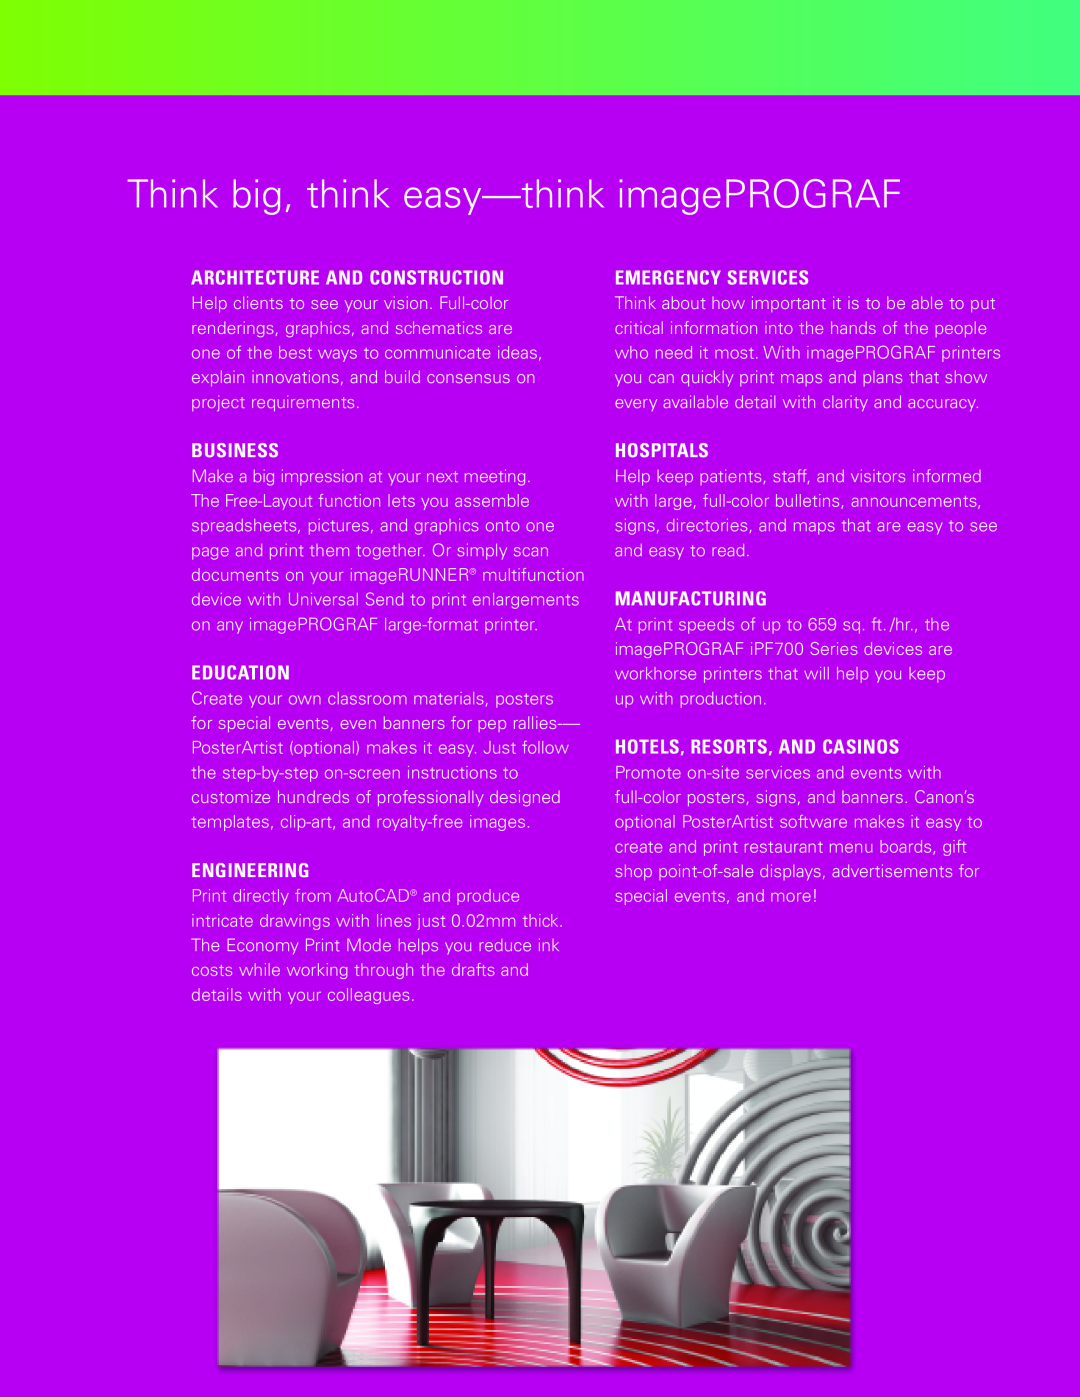 Canon IPF710, IPF605 Think big, think easy-think imagePROGRAF, Architecture And Construction, Emergency Services, Business 